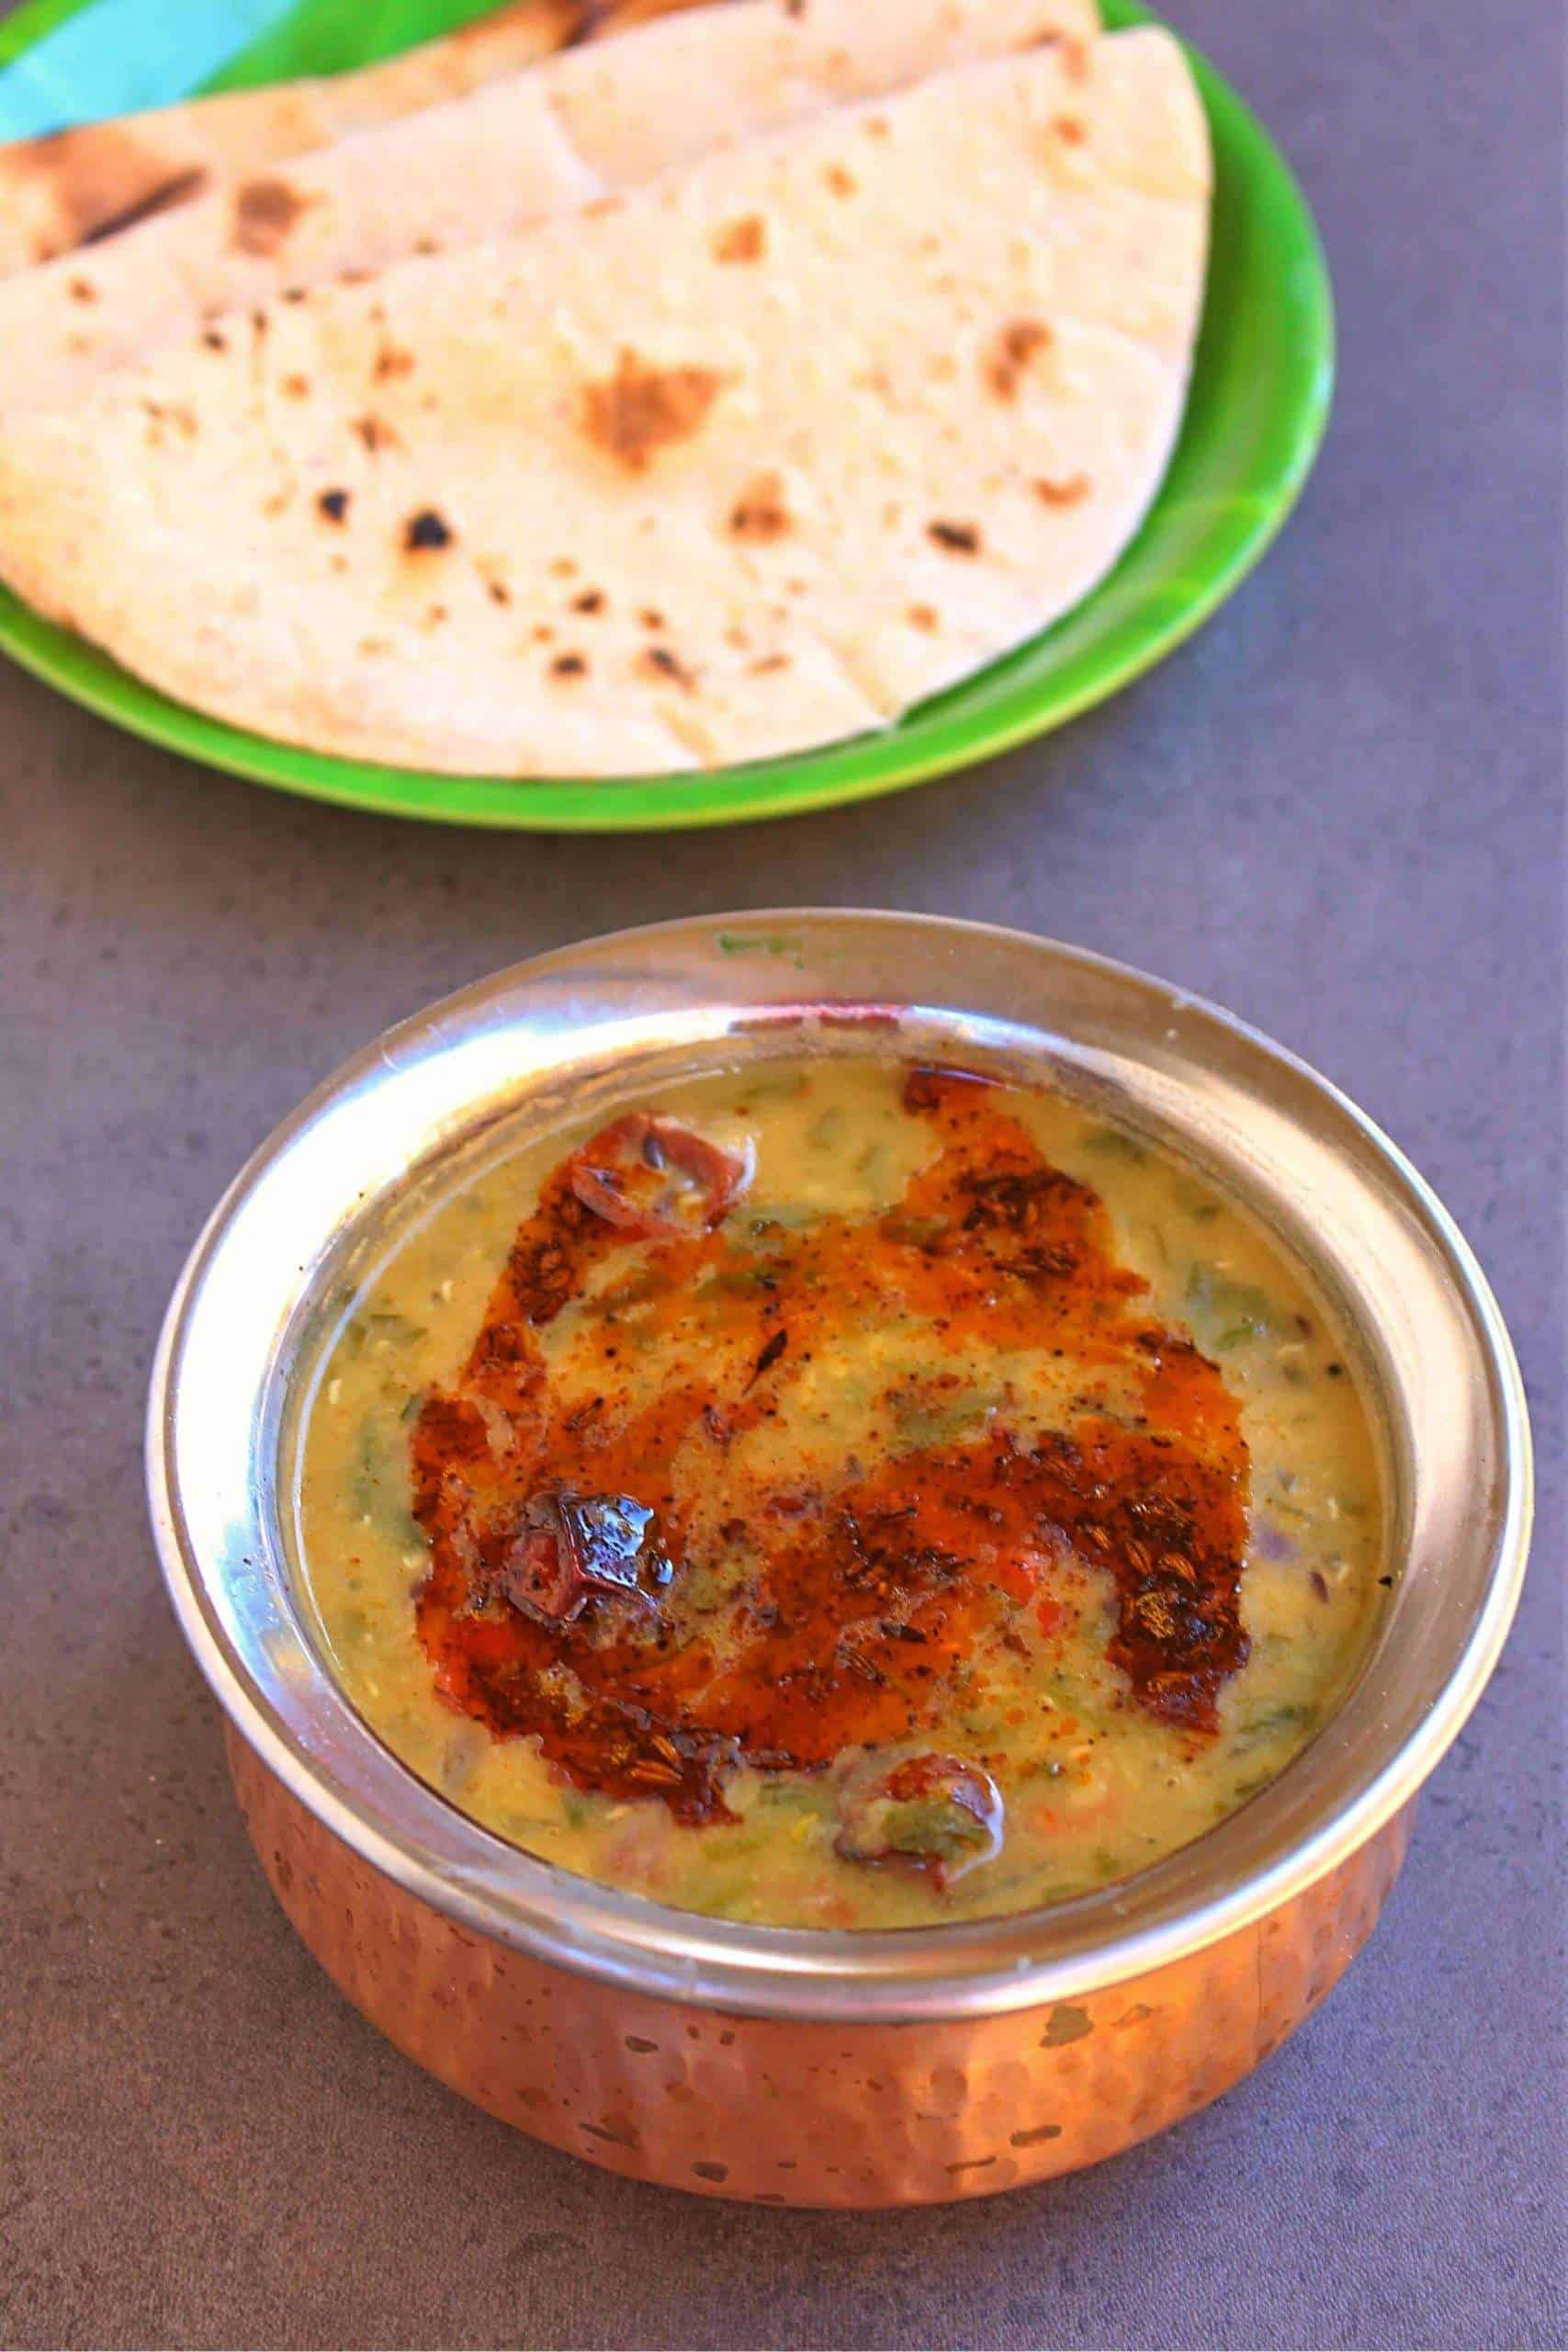 Methi Dal With Roti in background